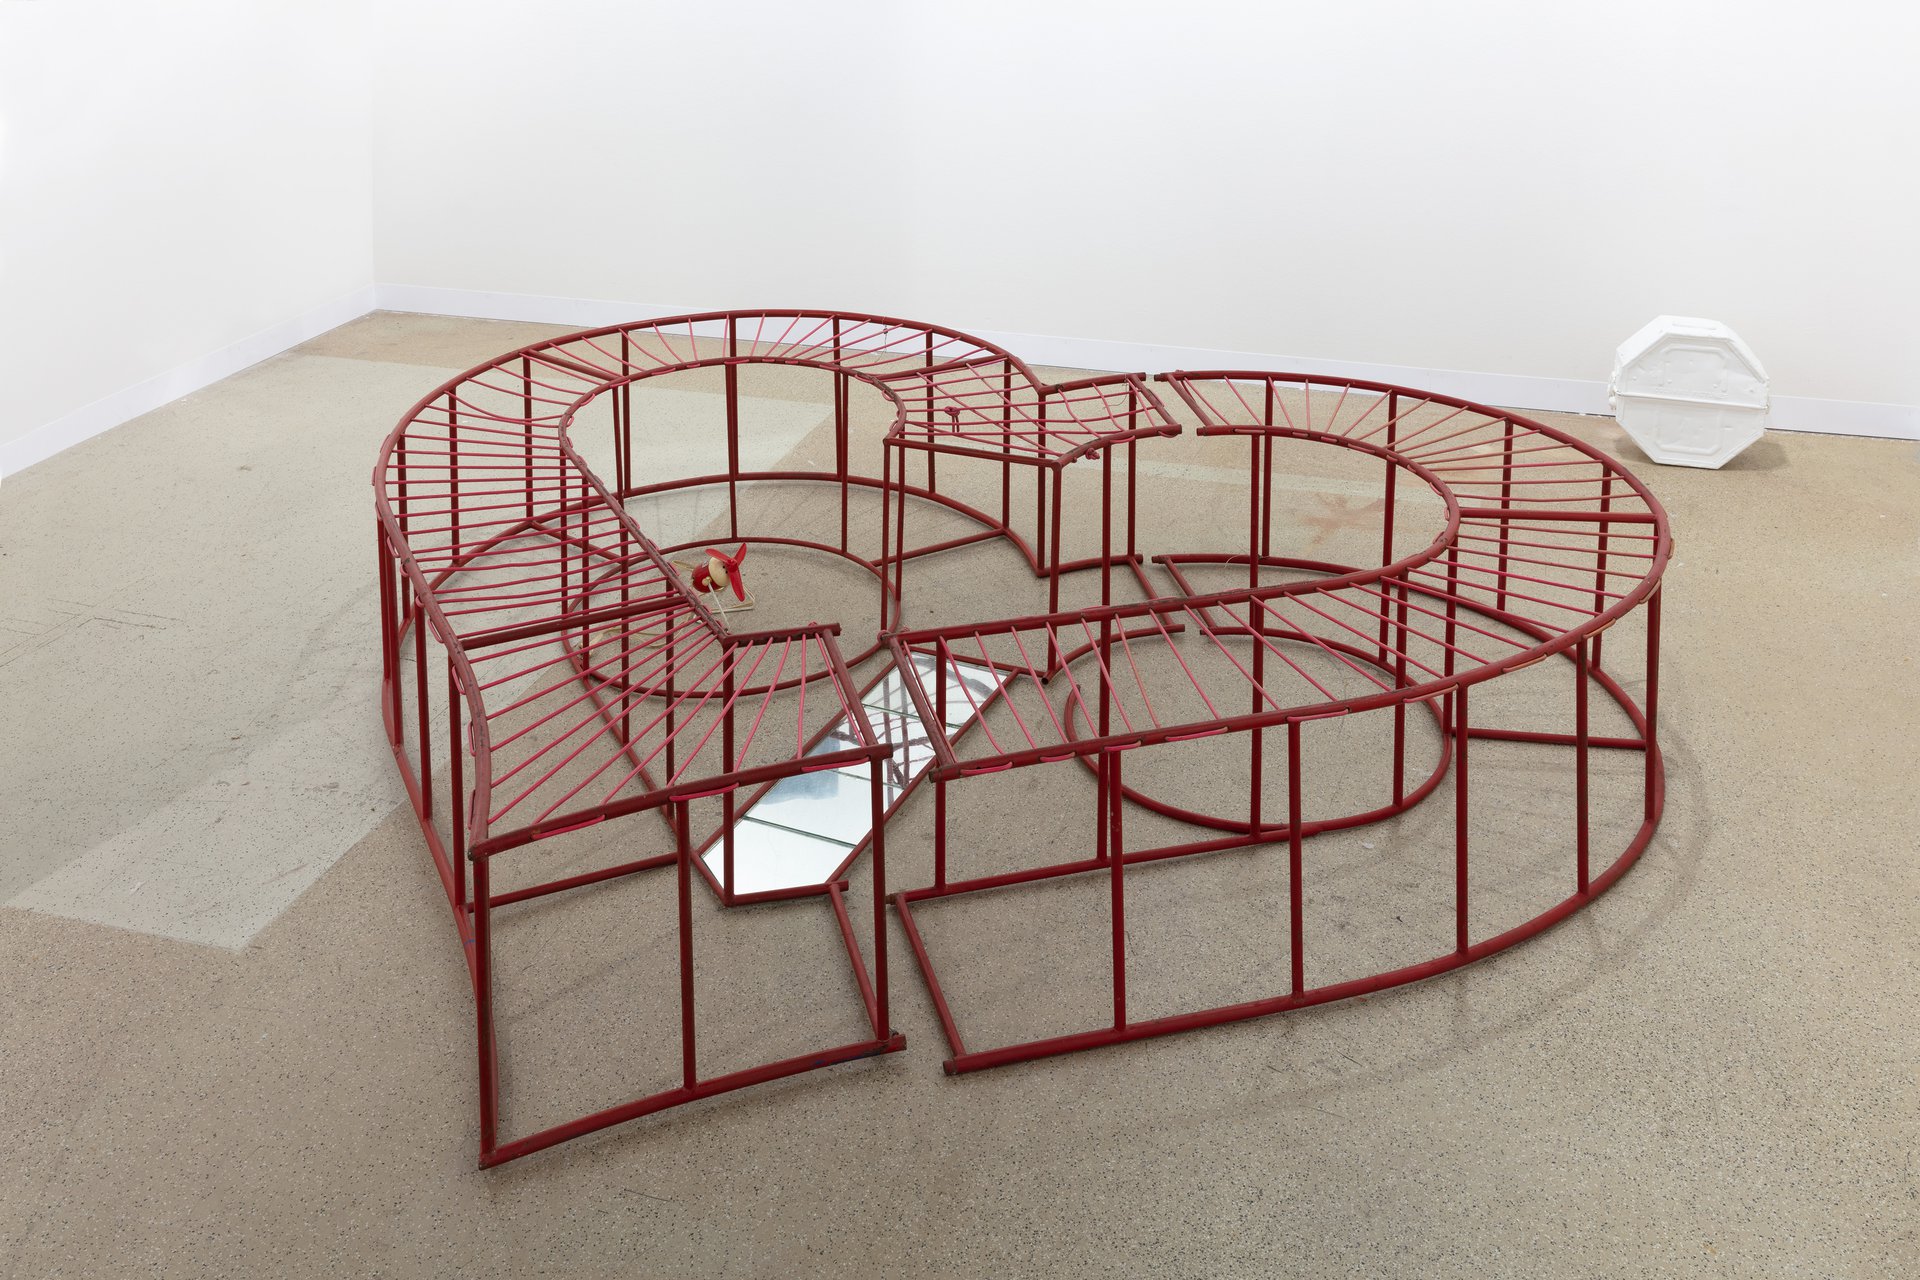 Stano Filko Heart of Love, 1966, Metal construction, plastic string, mirrors, found object (ventilator) [a modified version of this work has been realized in the early 2000s: the components such as a 500 x 400 cm carpet and a different sculptural object are included as well] 280 x 244 x 52 cm (m.o.)